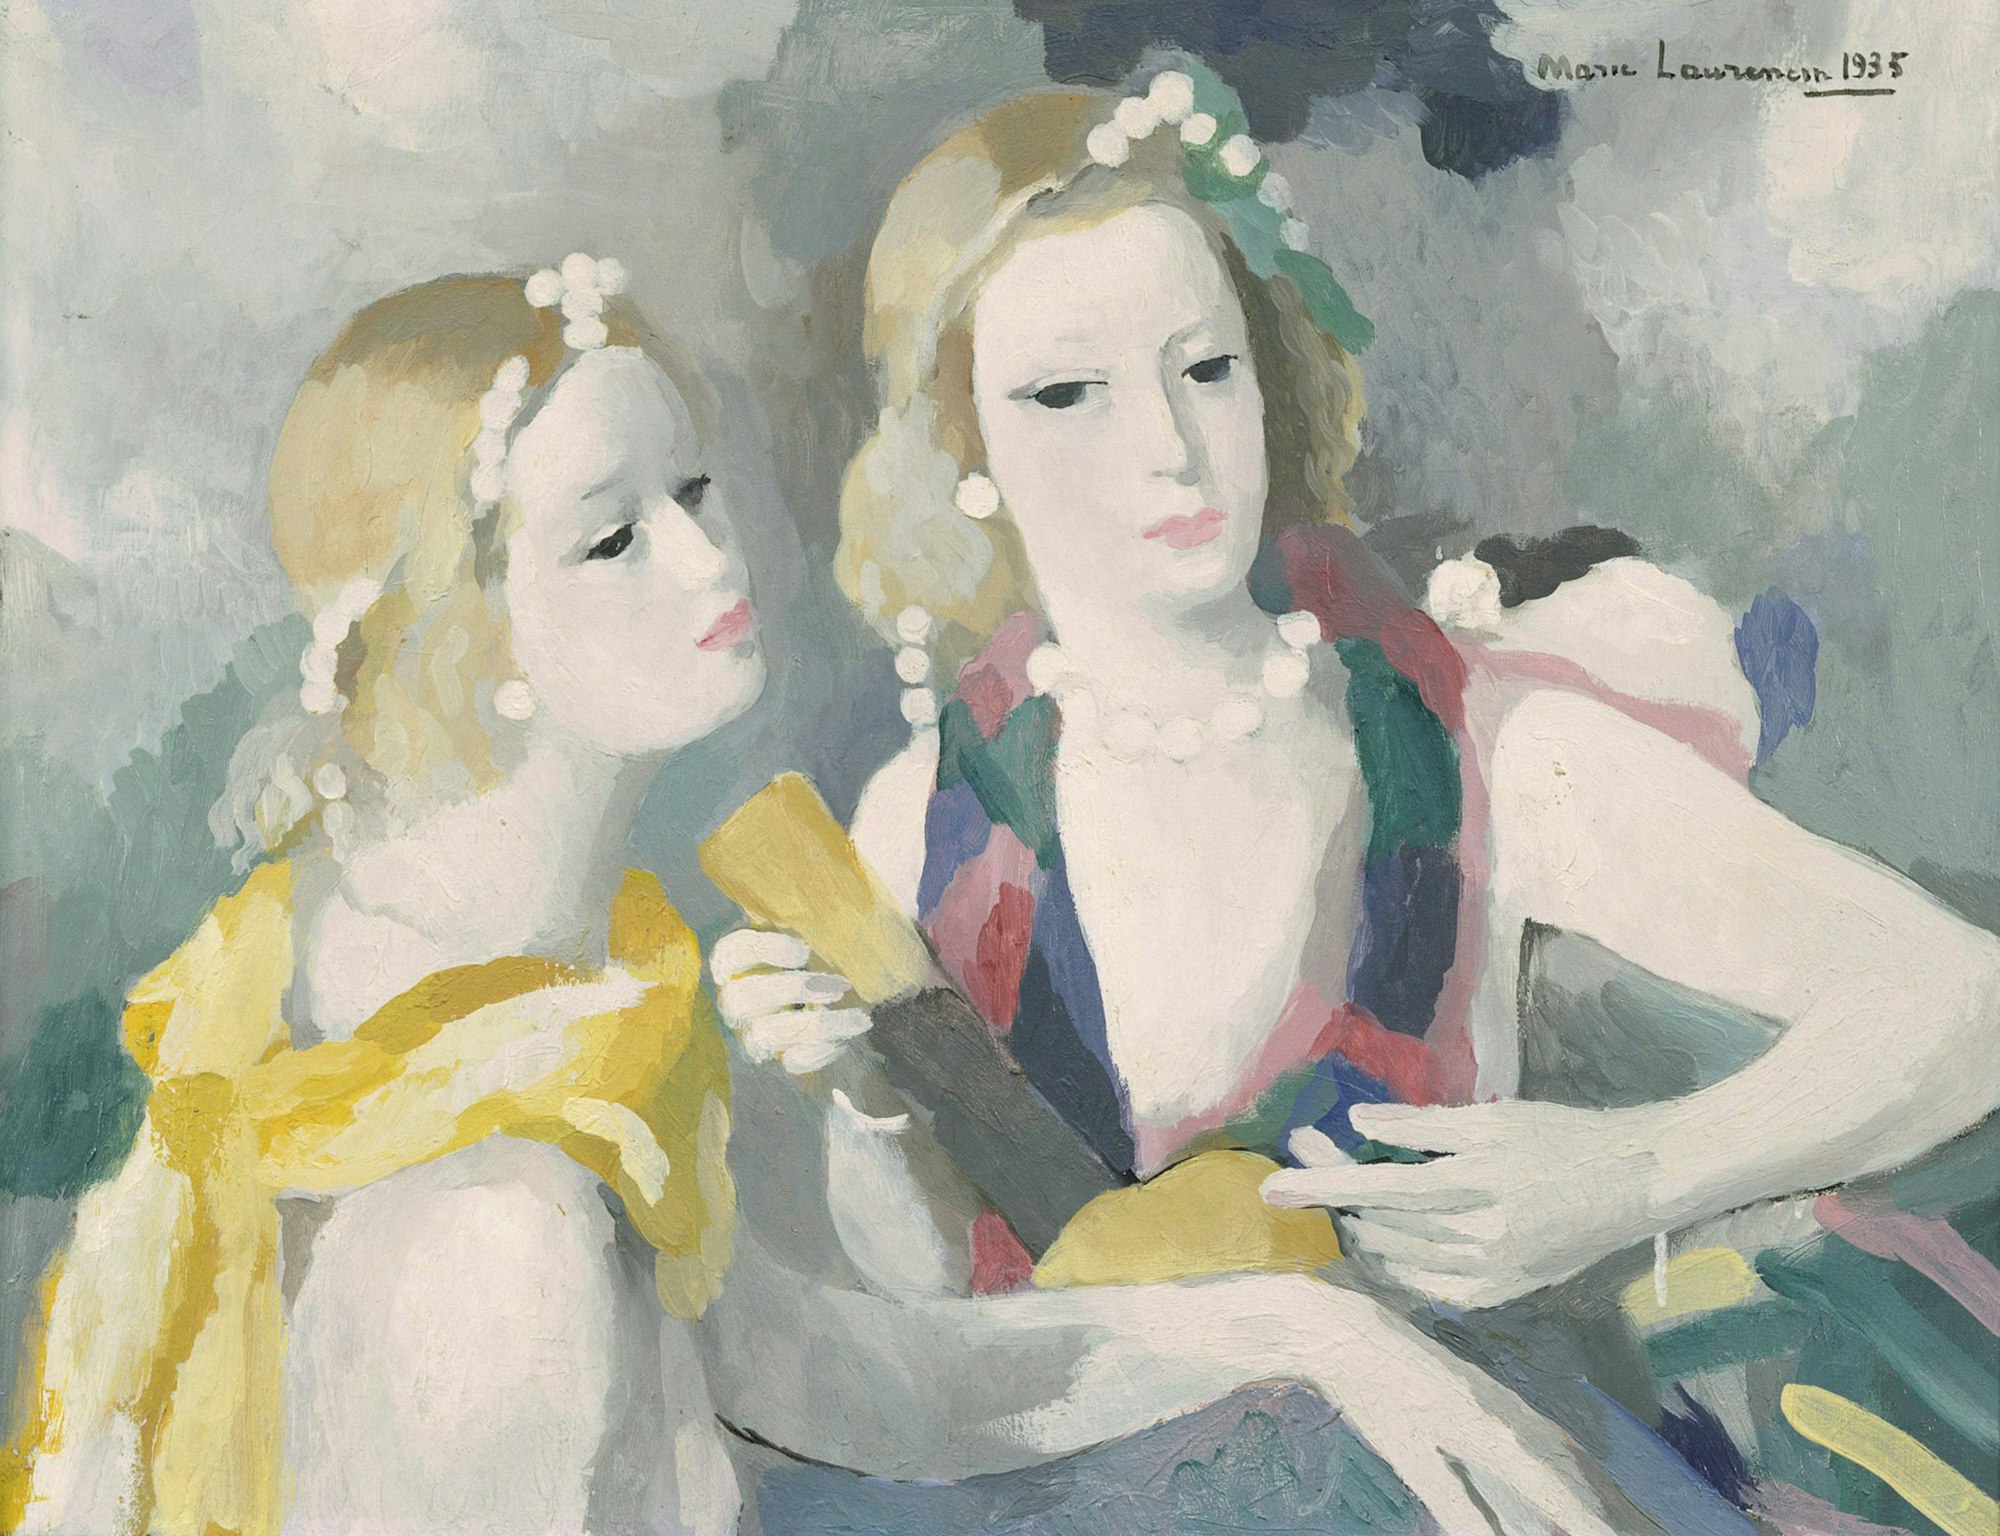 Marie Laurencin Two women with musical instrument 1935, Art Gallery of New South Wales © Estate of Marie Laurencin/ADAGP. Copyright Agency